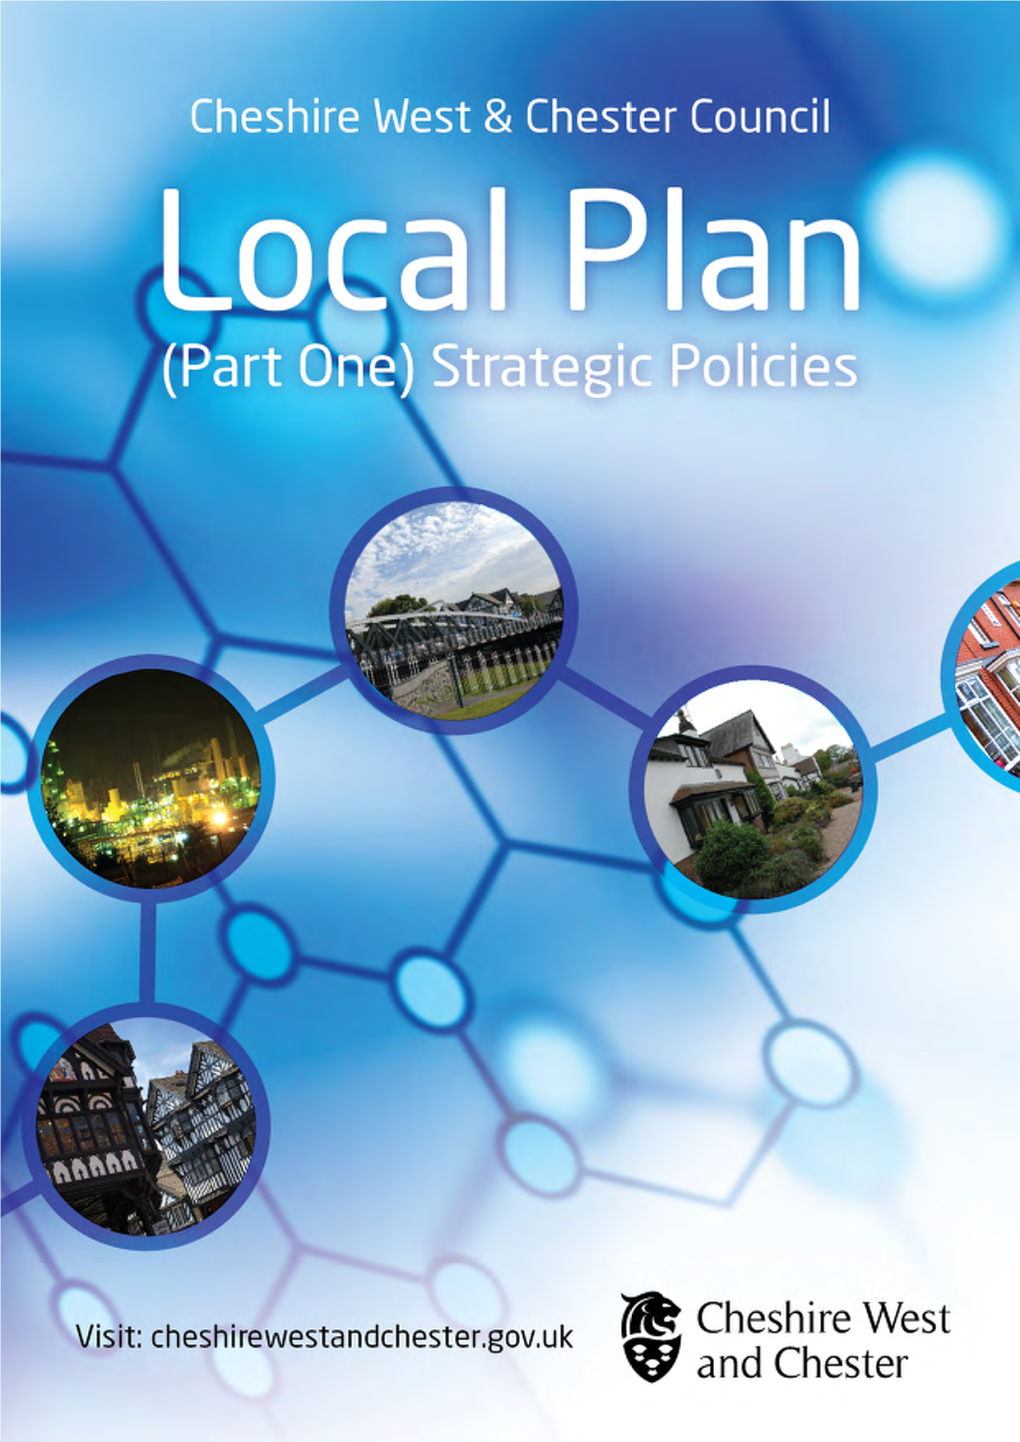 Local Plan (Part One) Strategic Policies